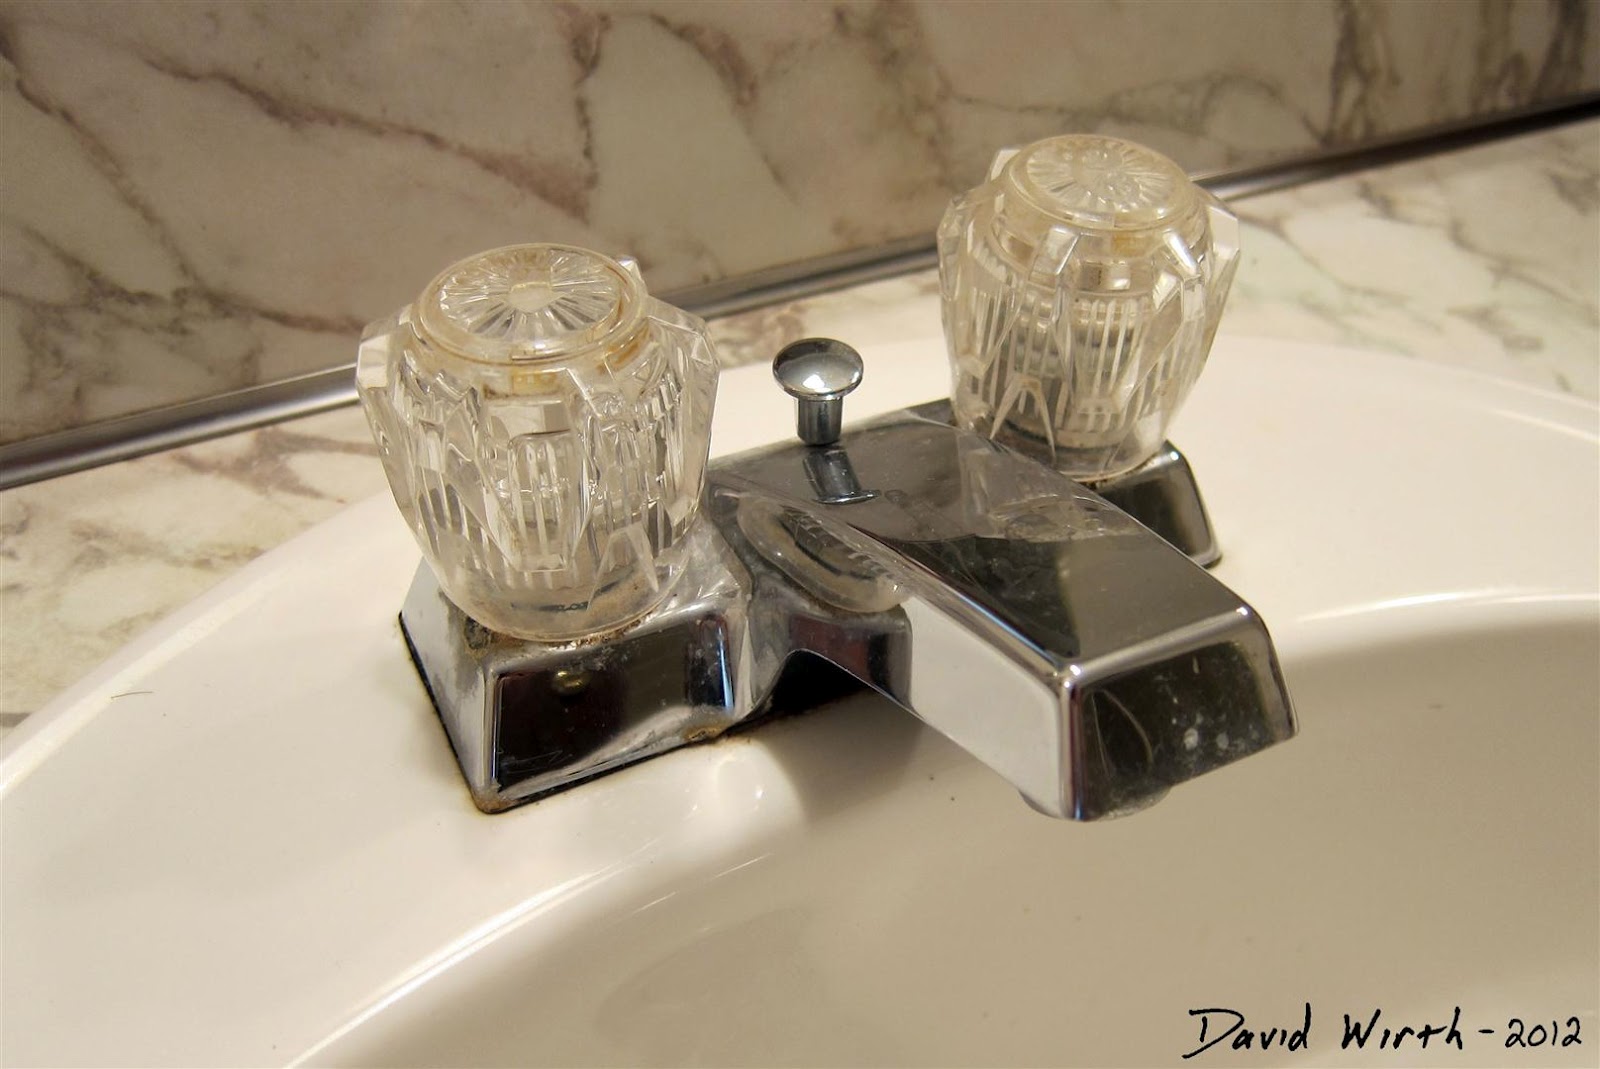 Bathroom Sink - How to Install a Faucet